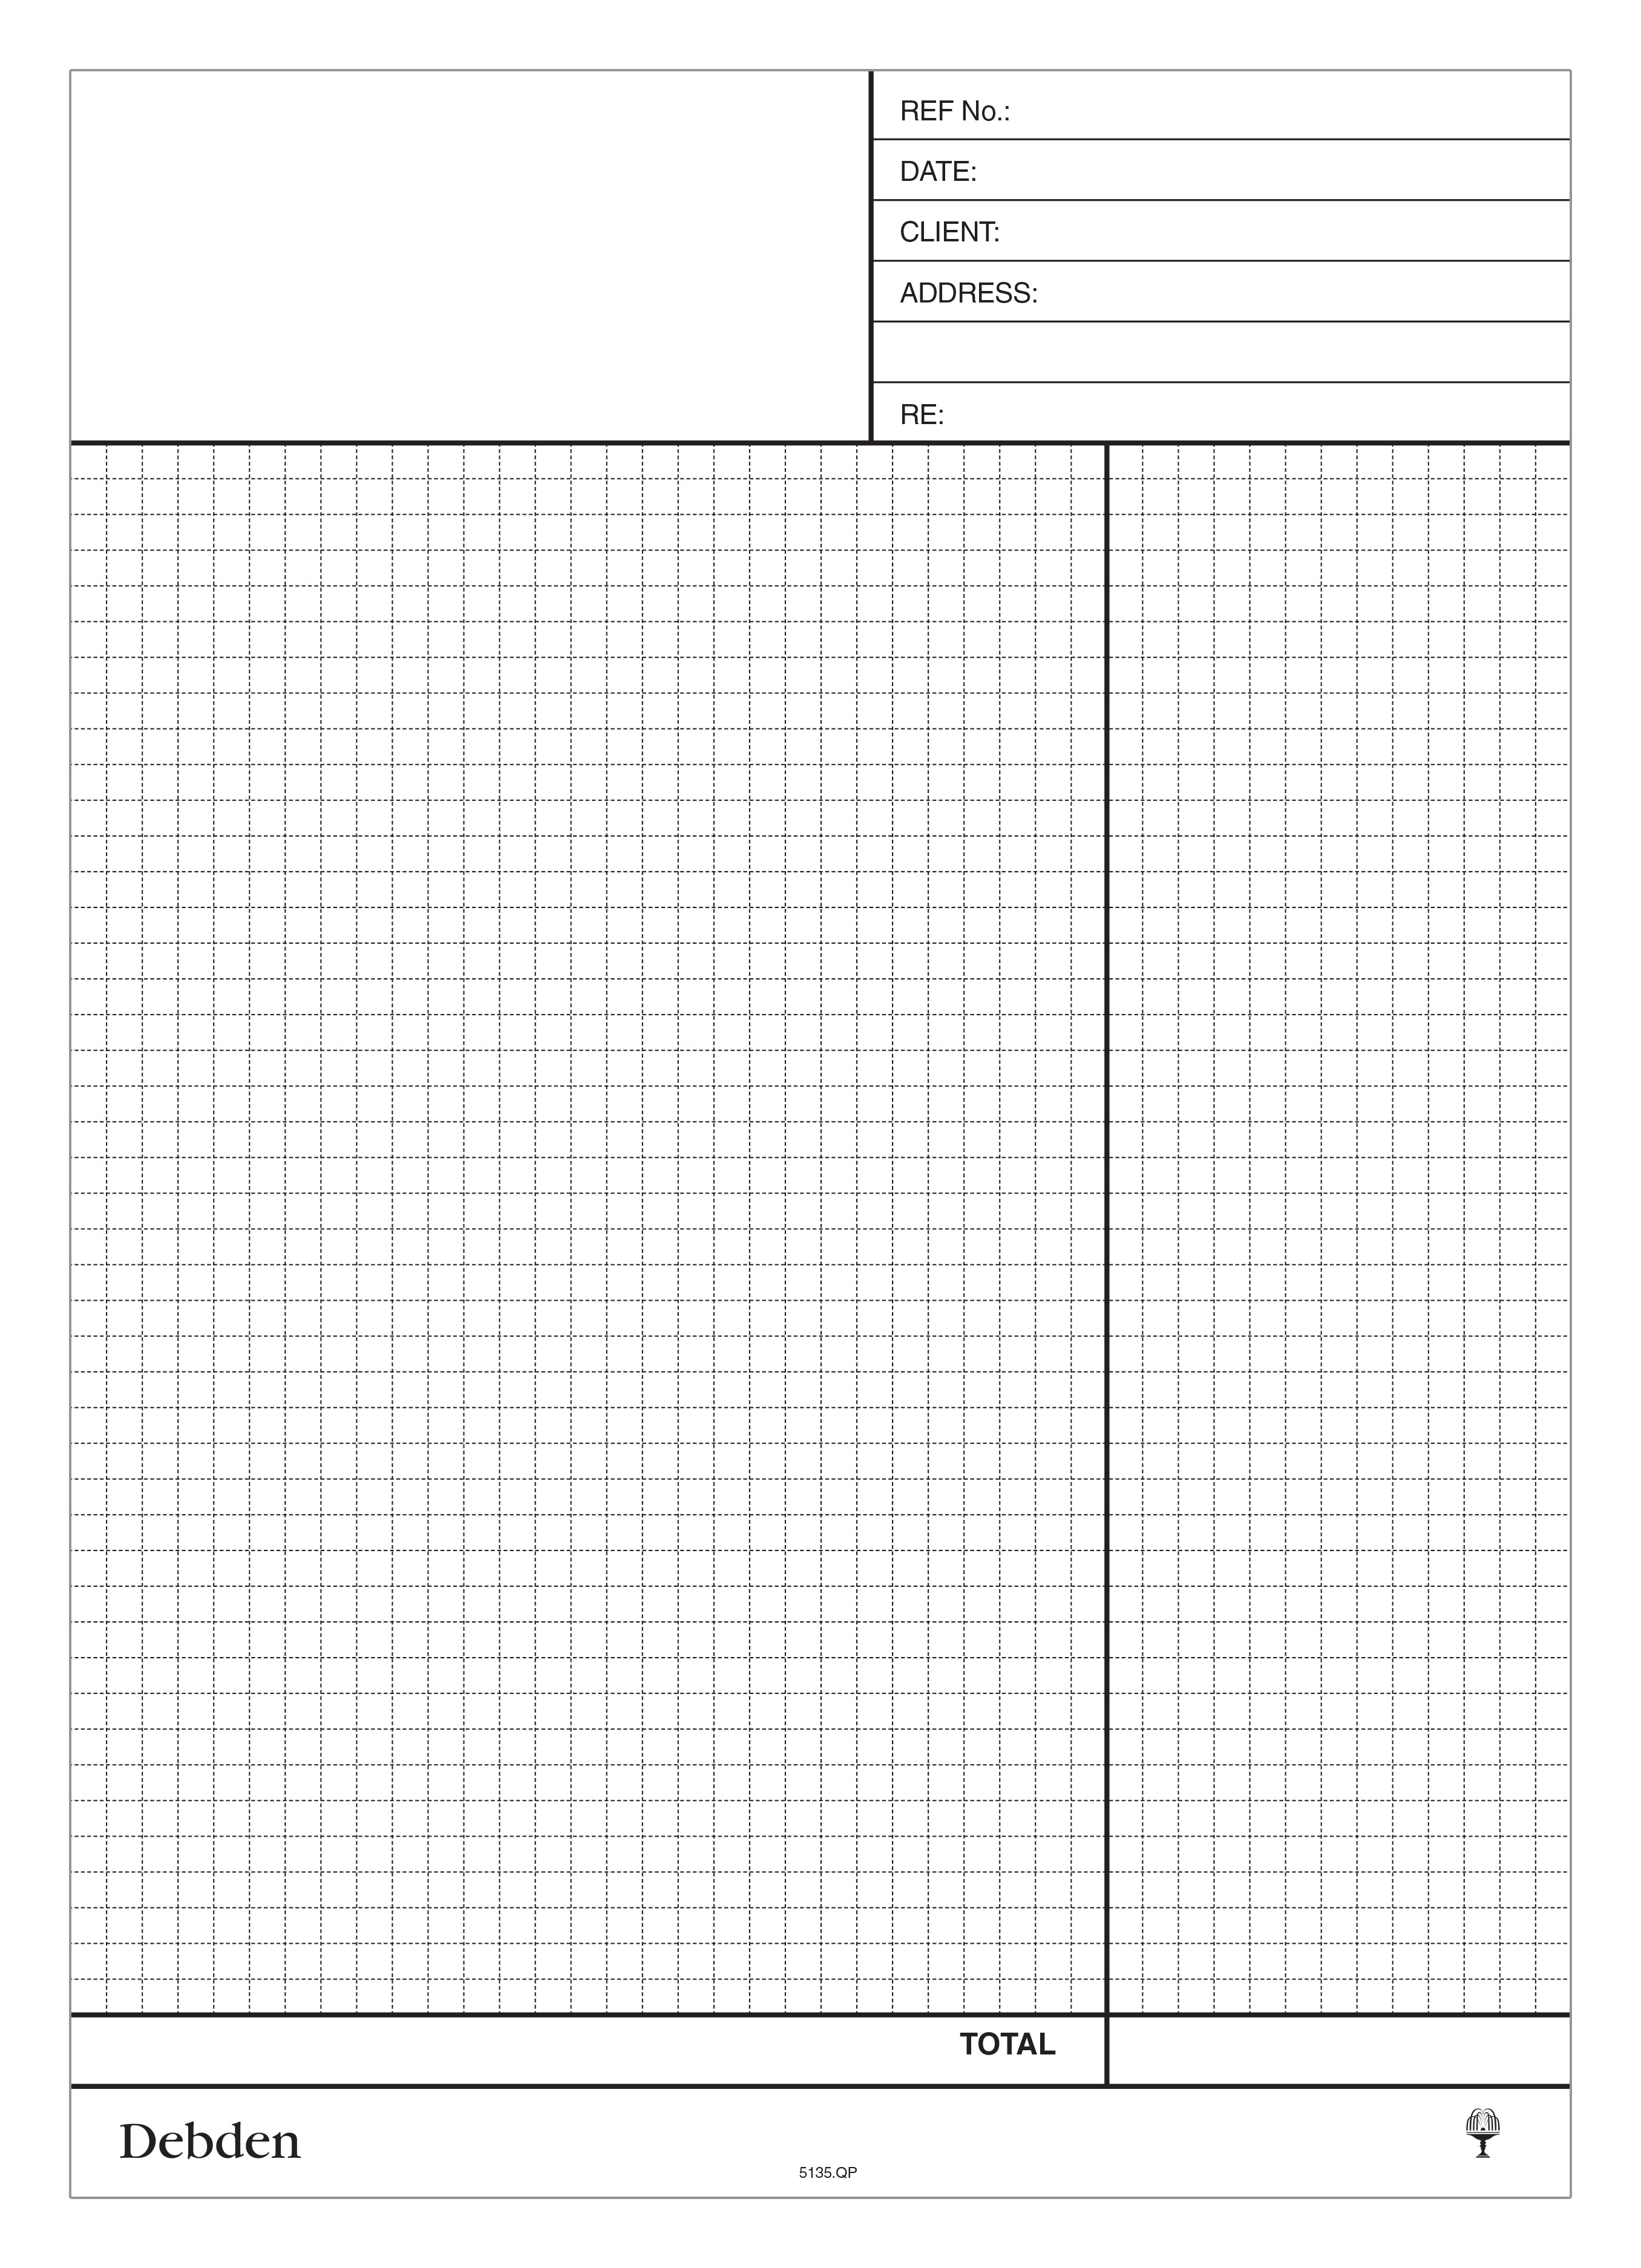 Collins Compendium Refill Ncr Quotations - Writing Pad